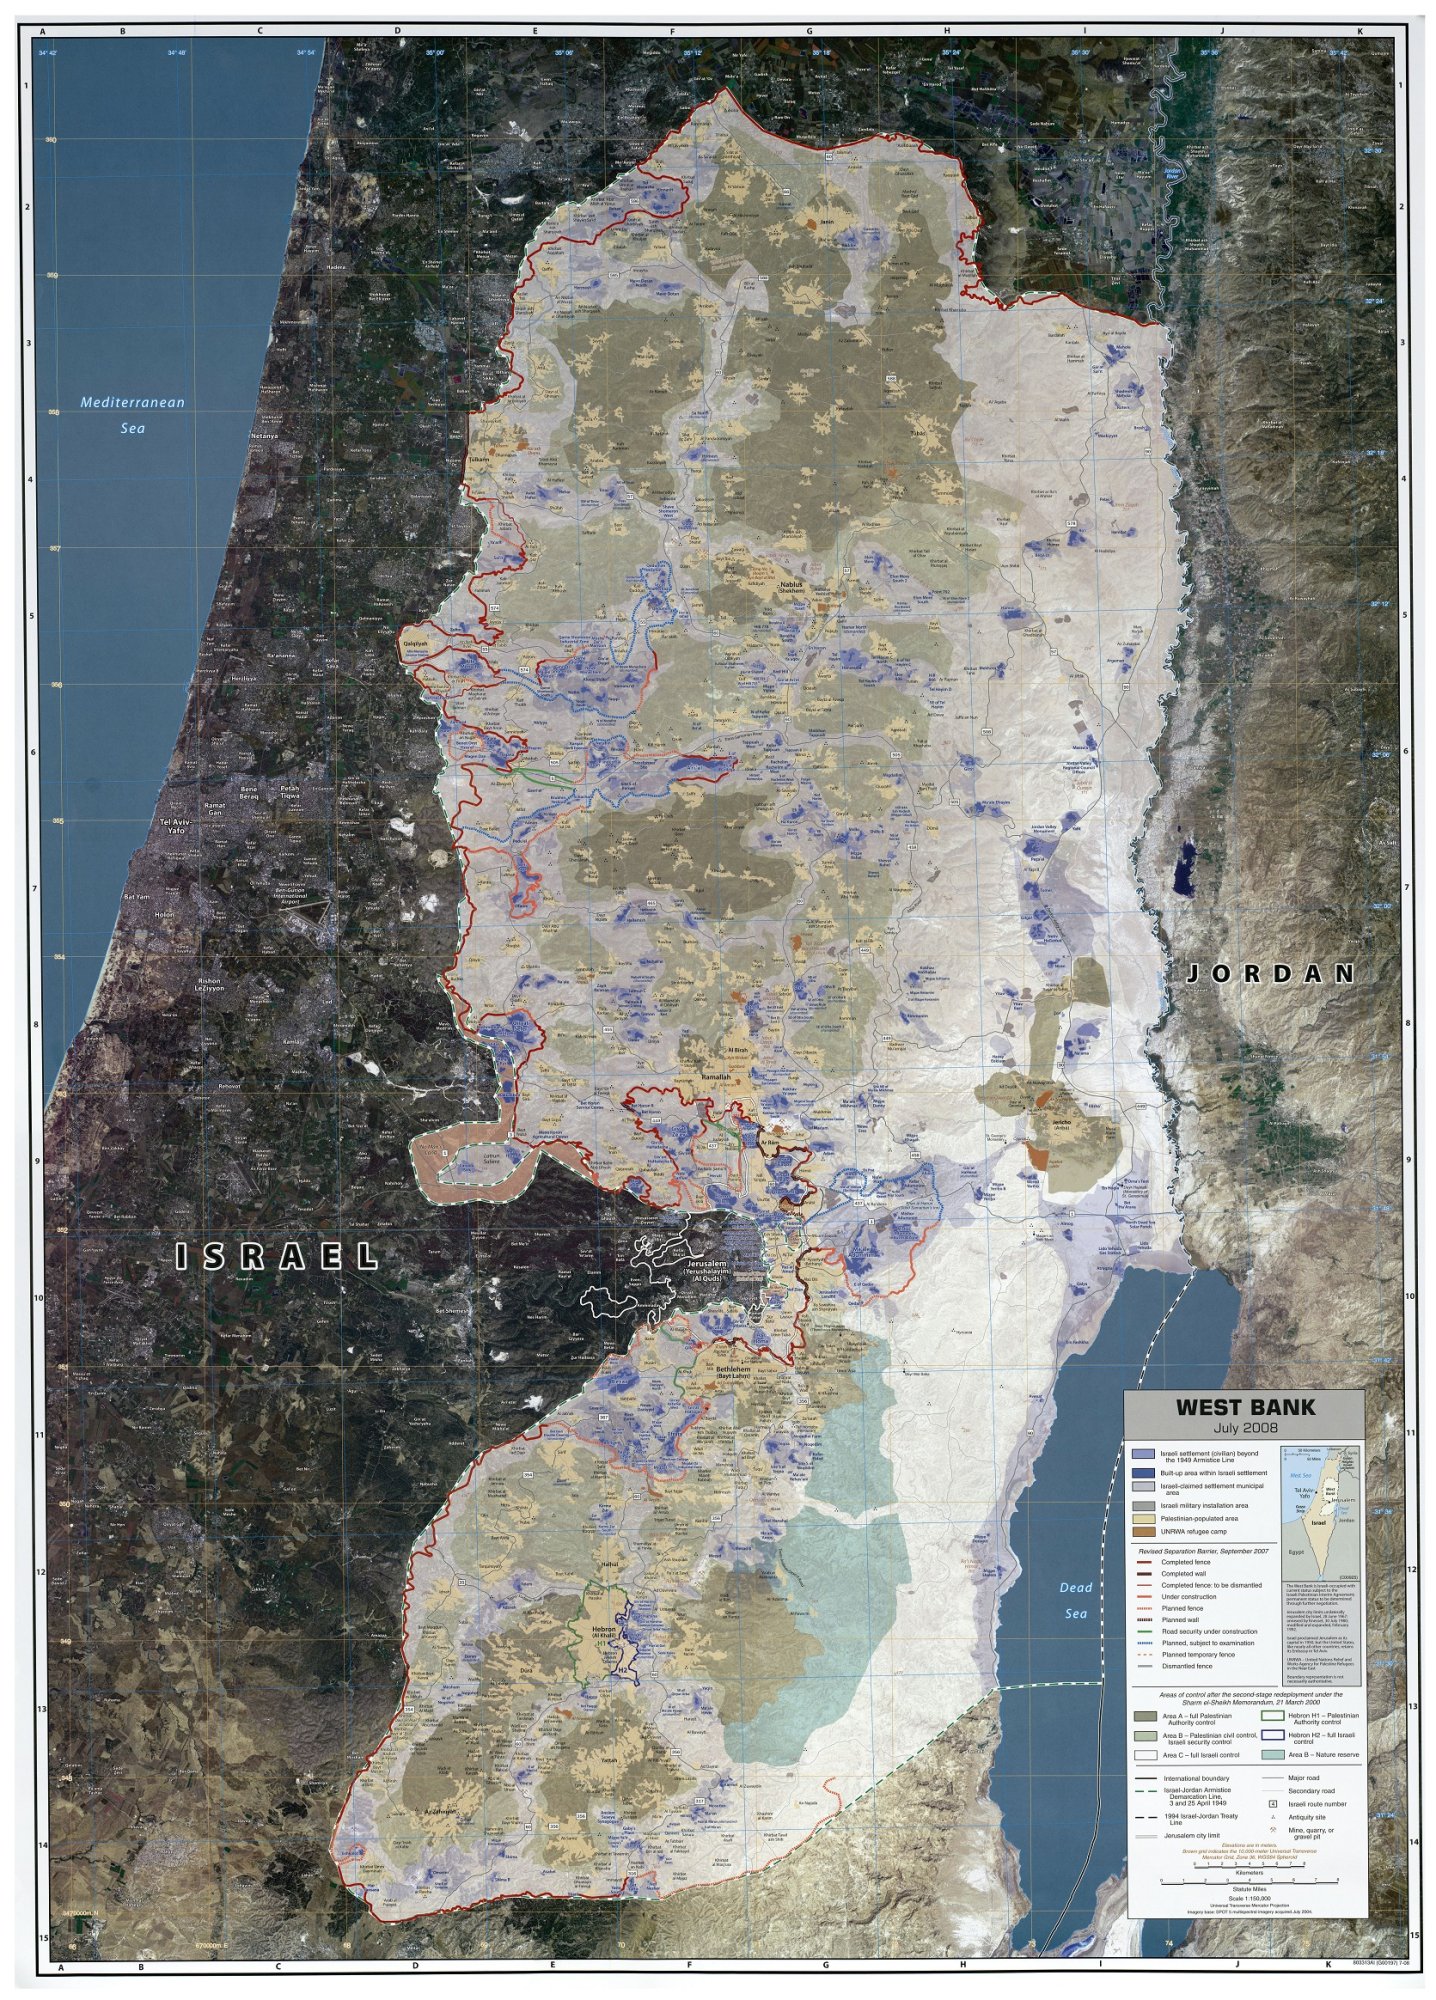 large-scale-map-of-west-bank-2008.jpg